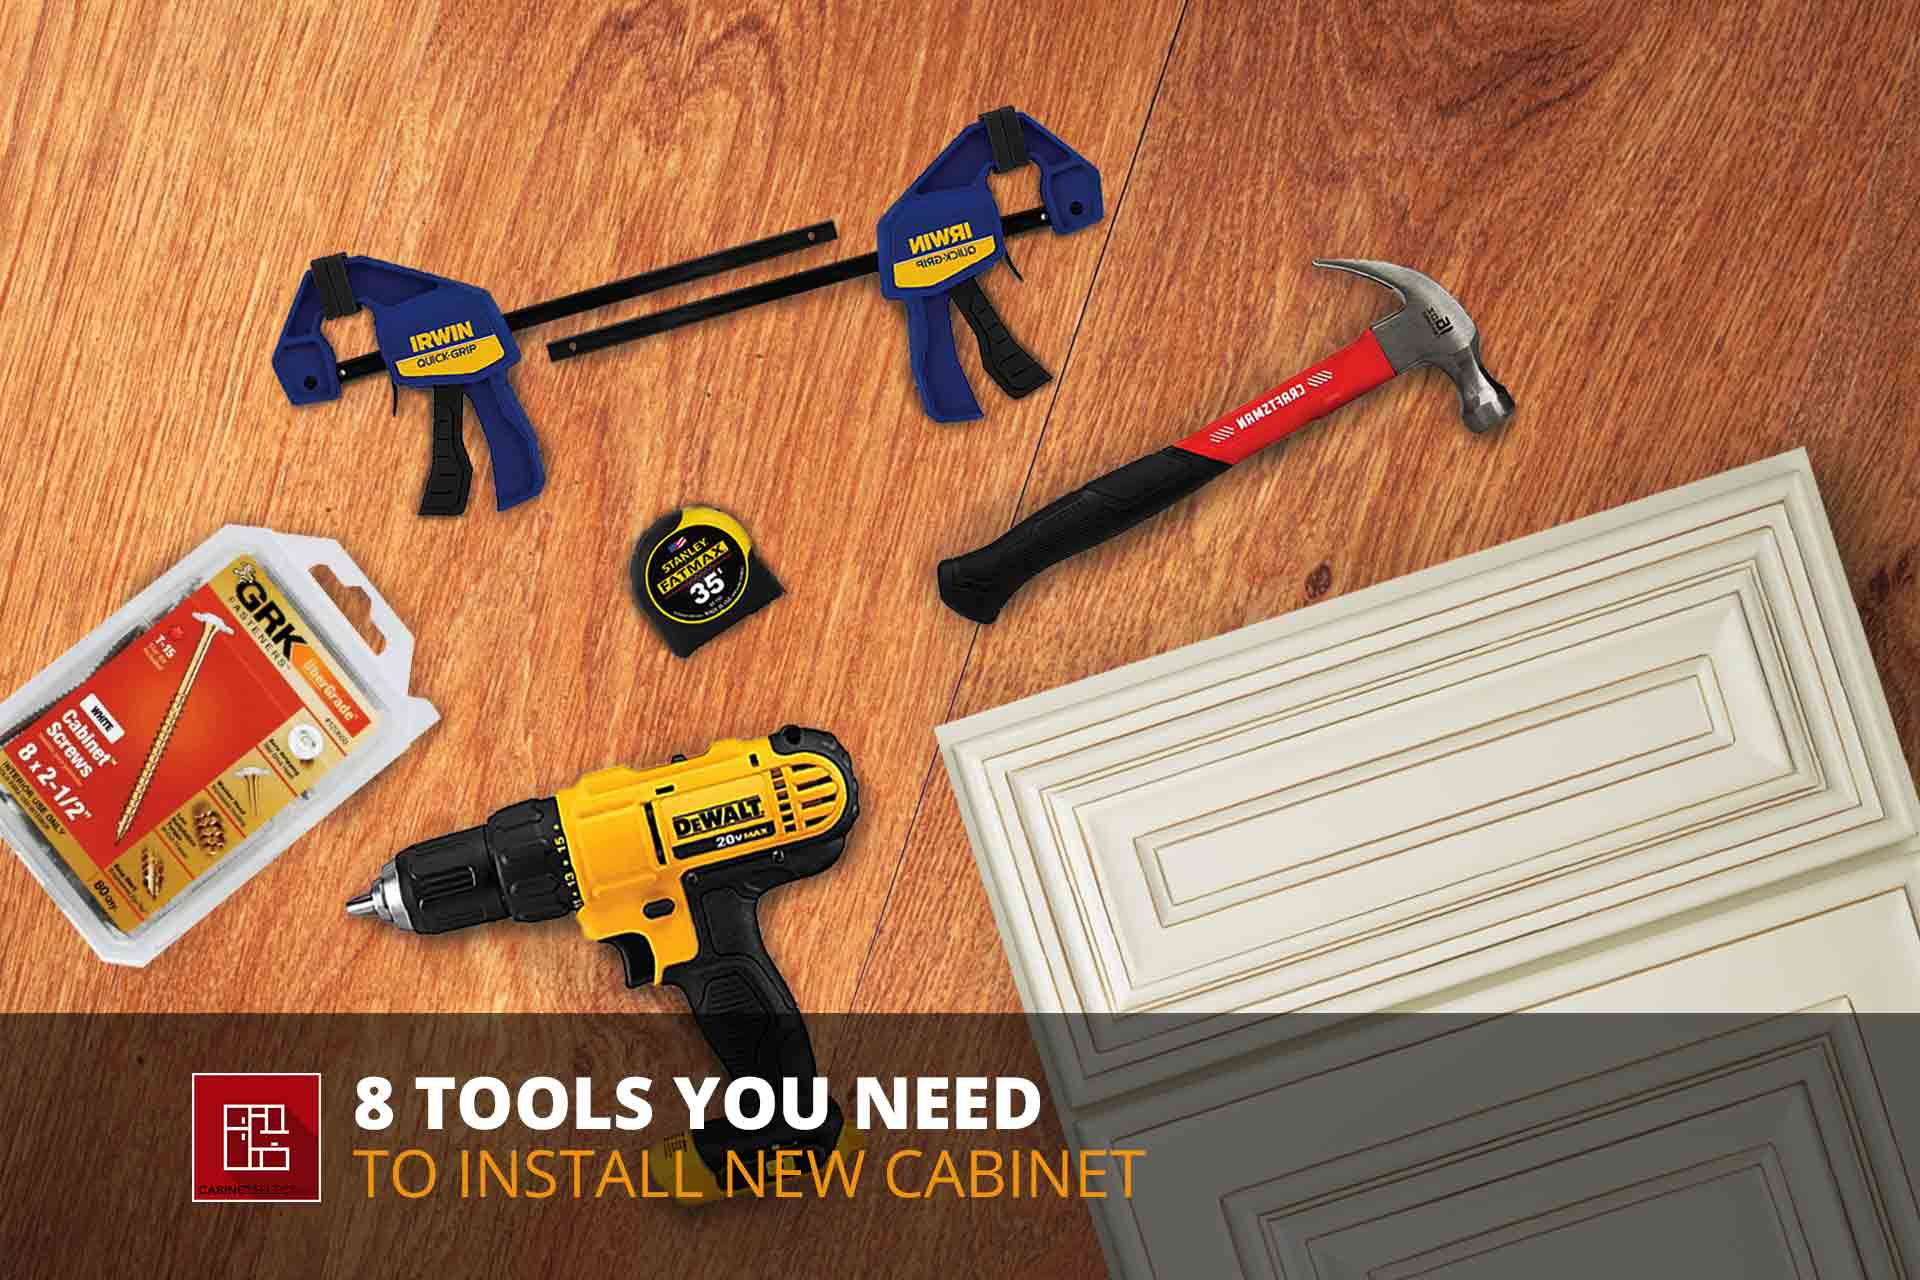 Tools You Need To Install New Cabinets, What Tools Are Needed To Install Kitchen Cabinets